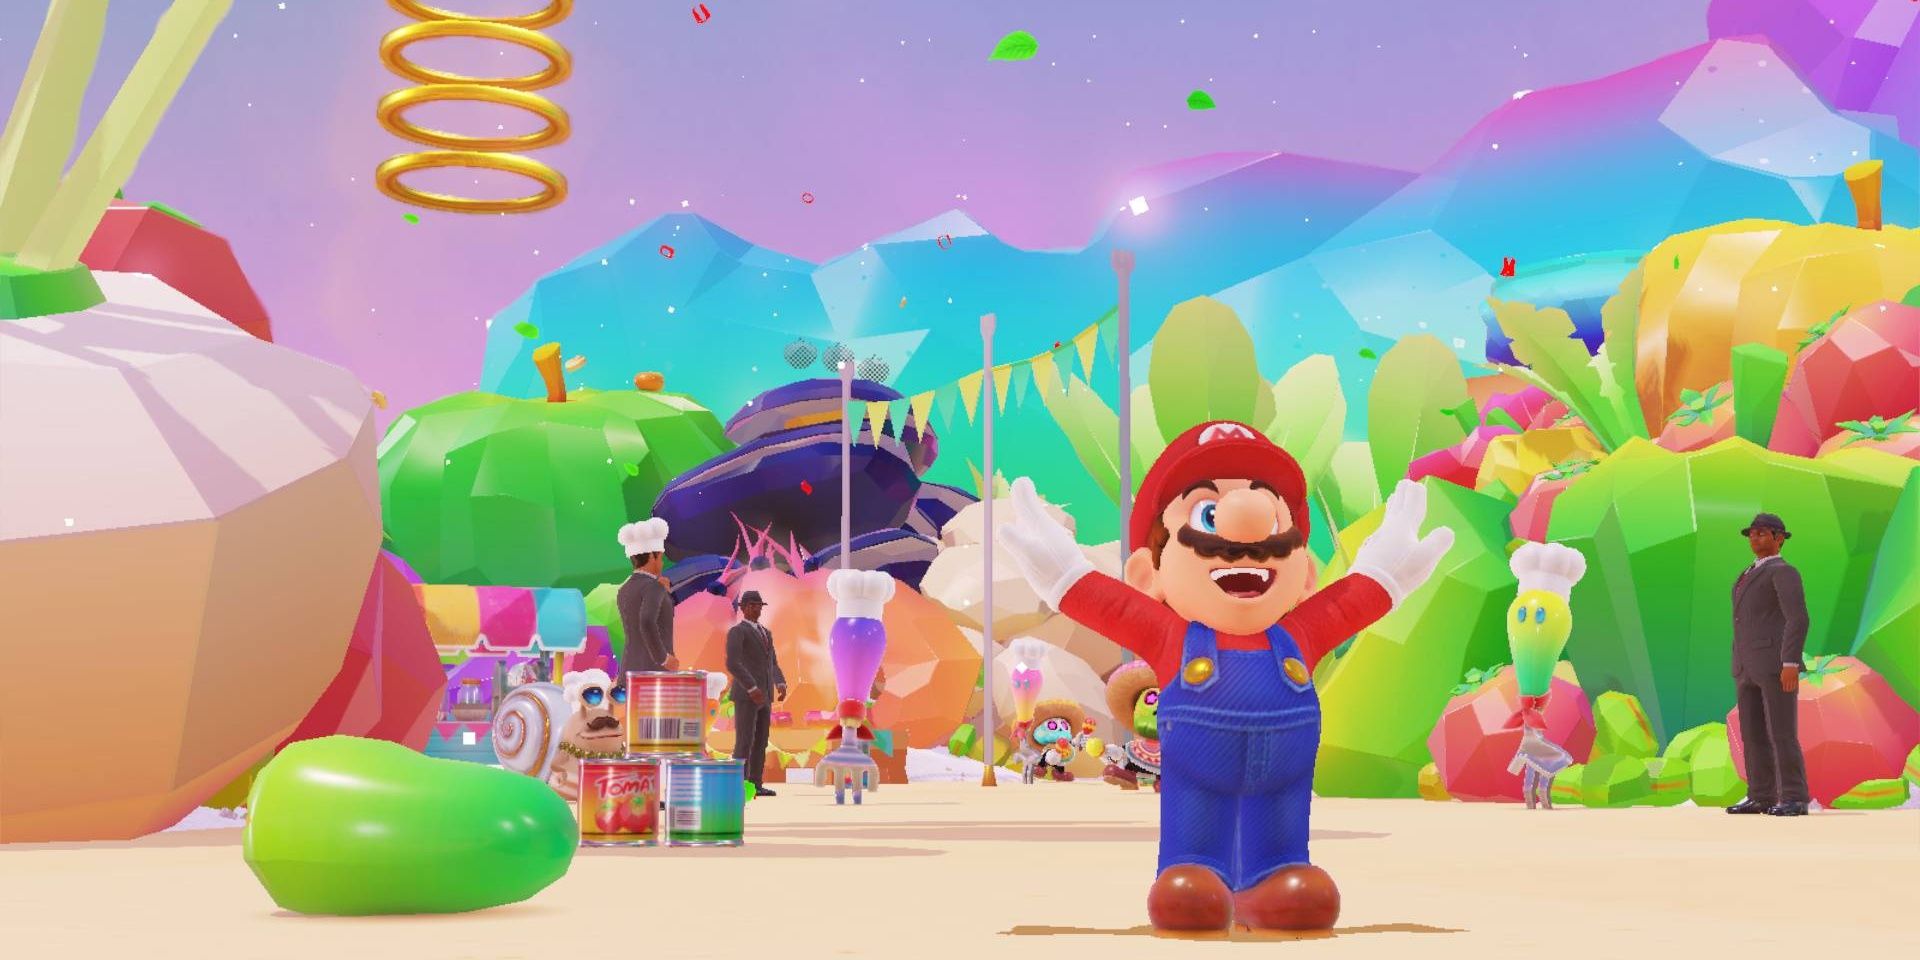 Super Mario Odyssey Gets Multiplayer Support For Ten Players